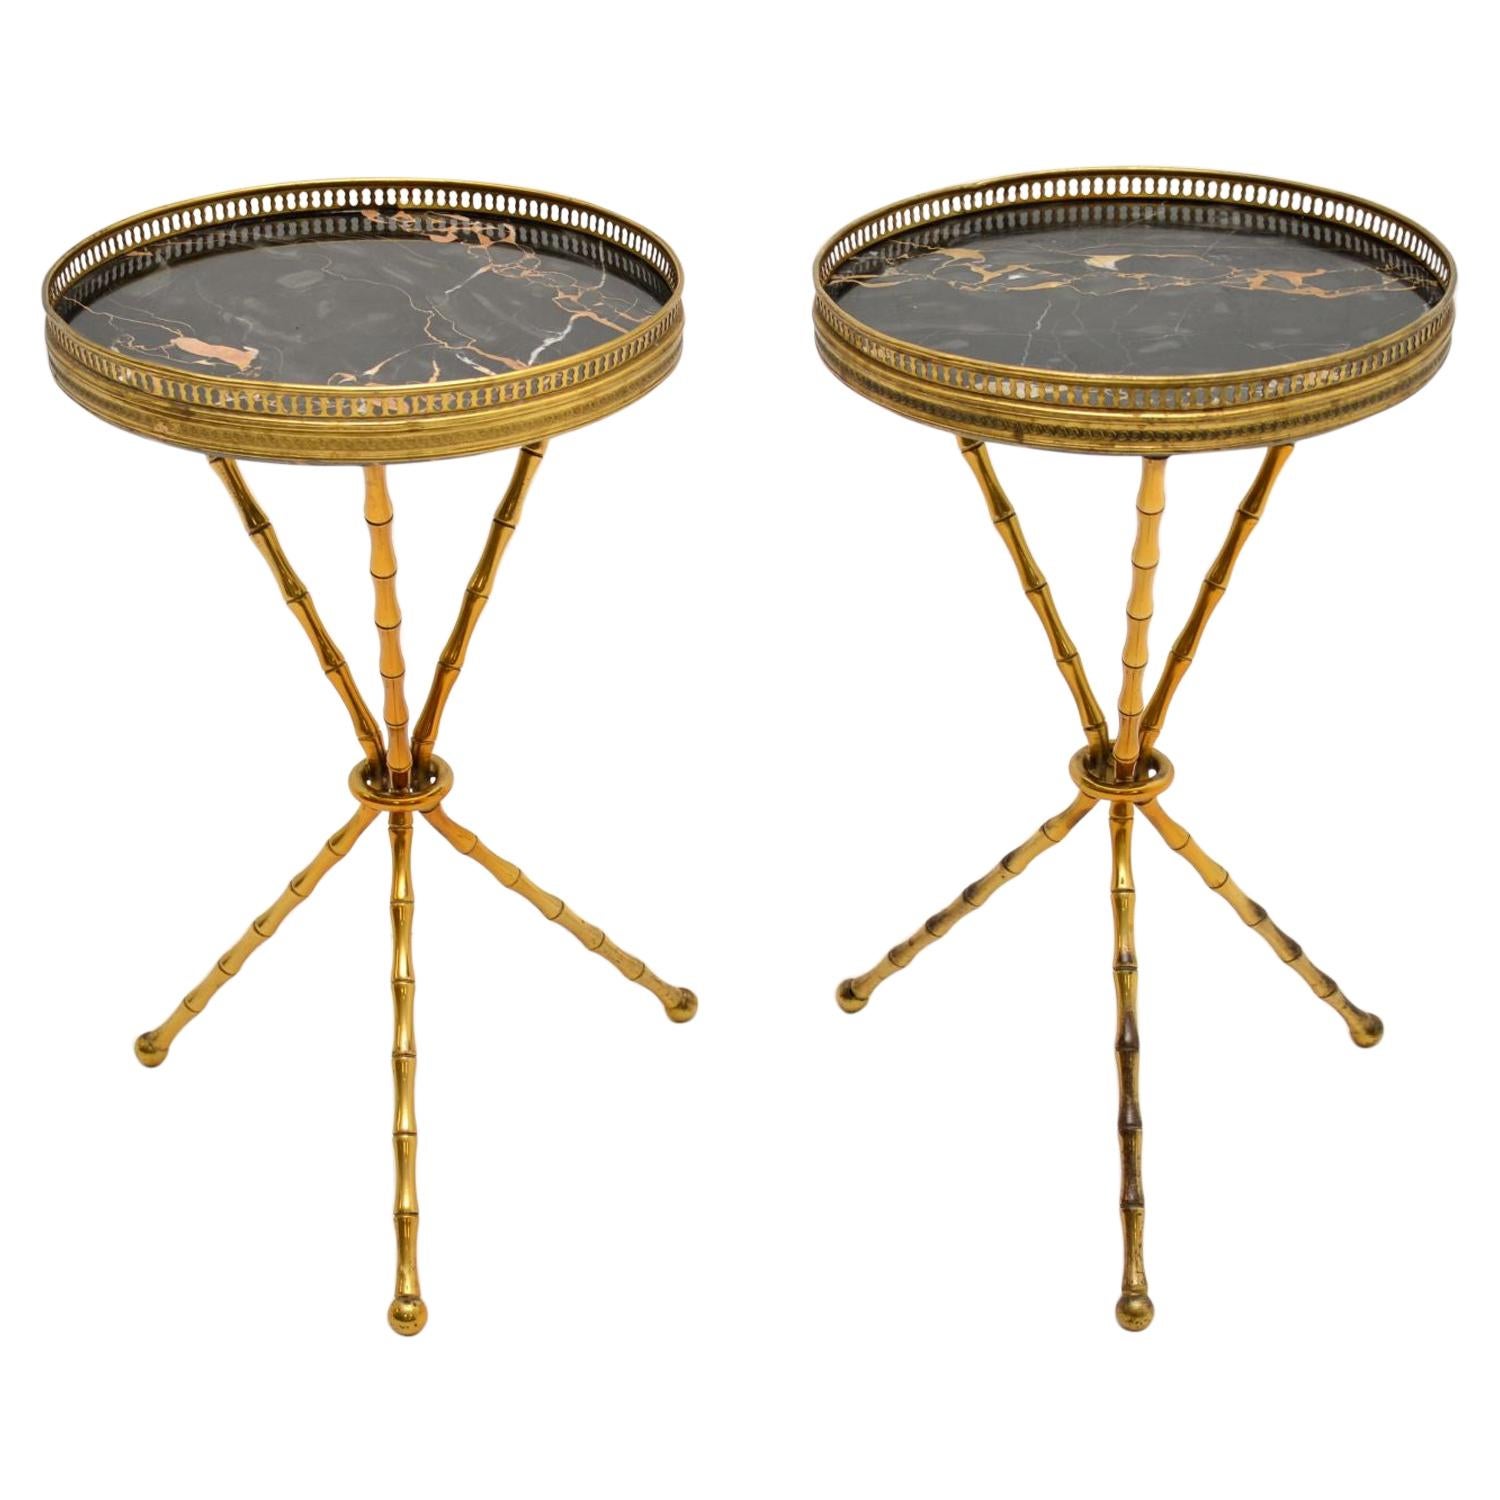 Pair of Vintage Brass and Marble Side Tables